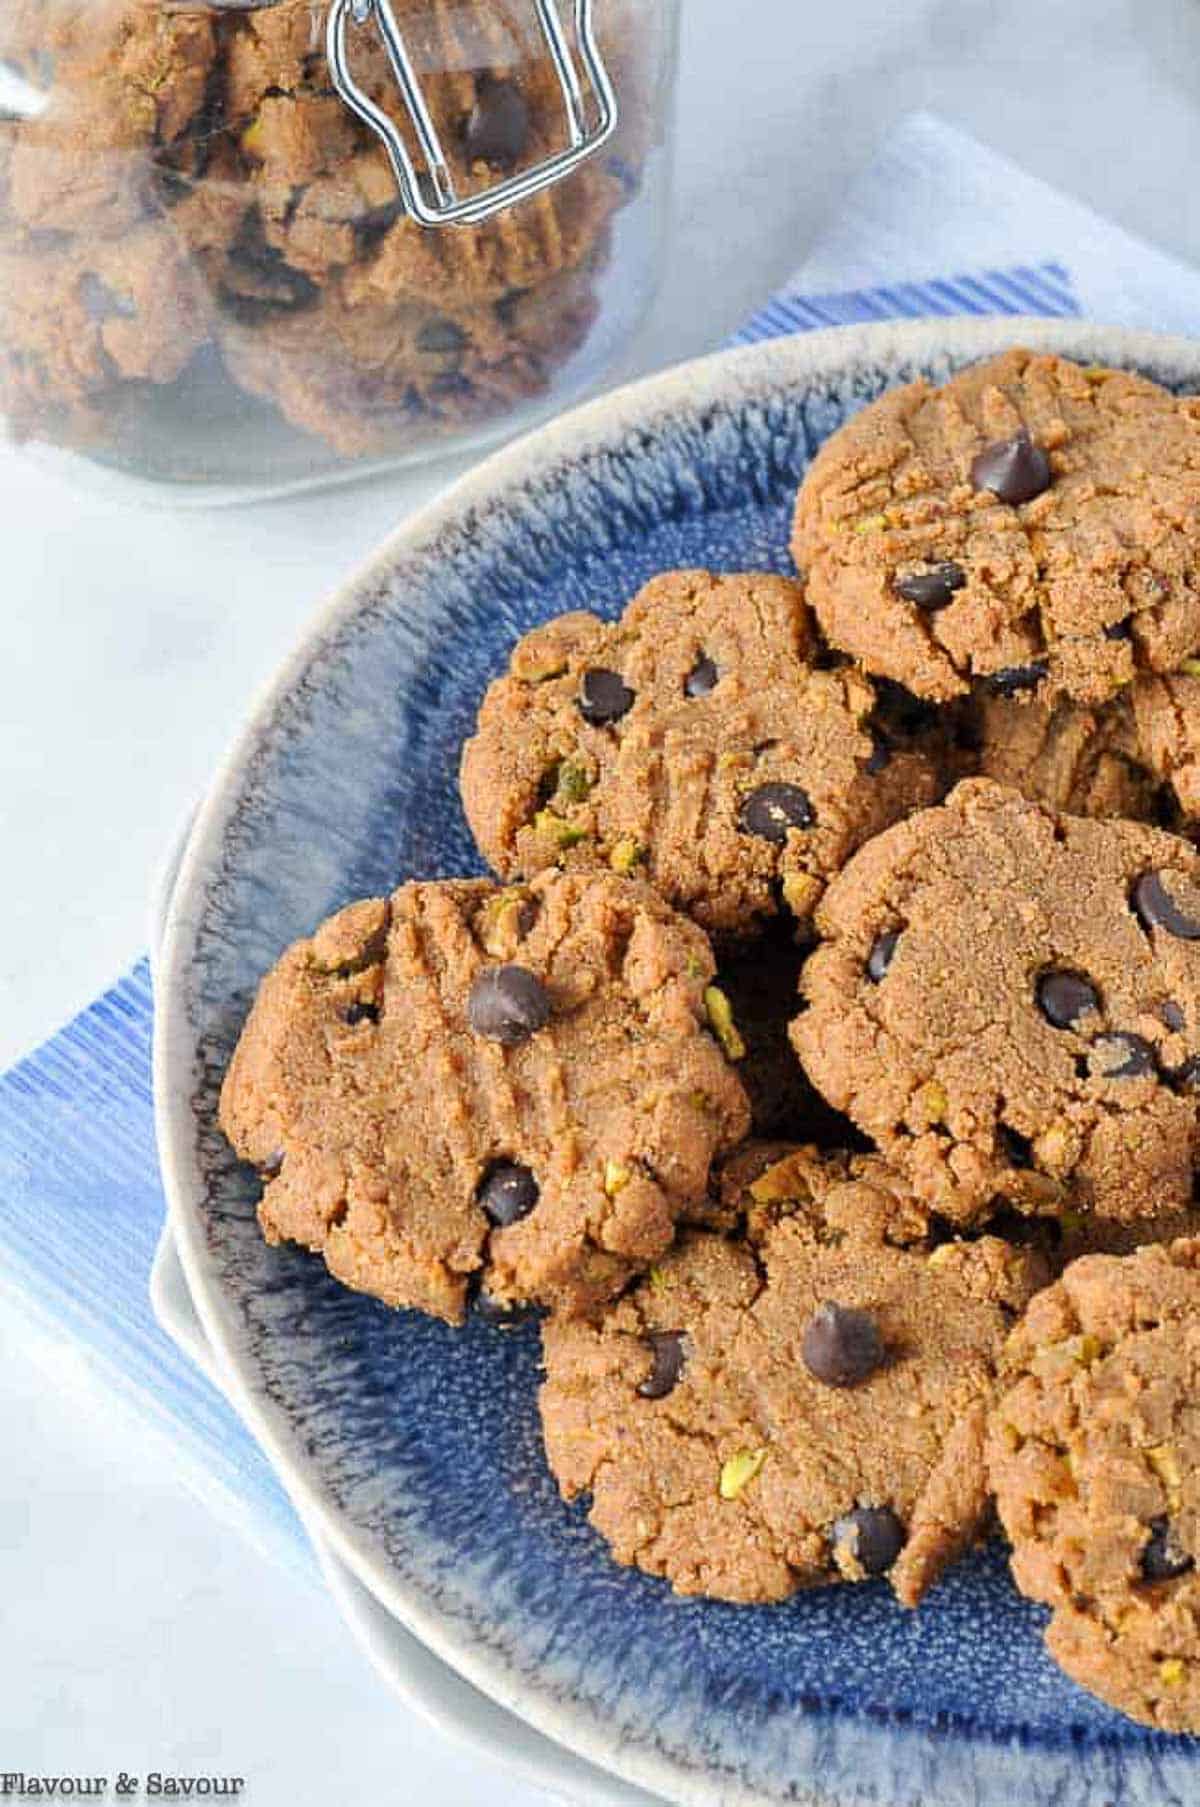 Flourless almond butter chocolate chip cookies on a blue plate.